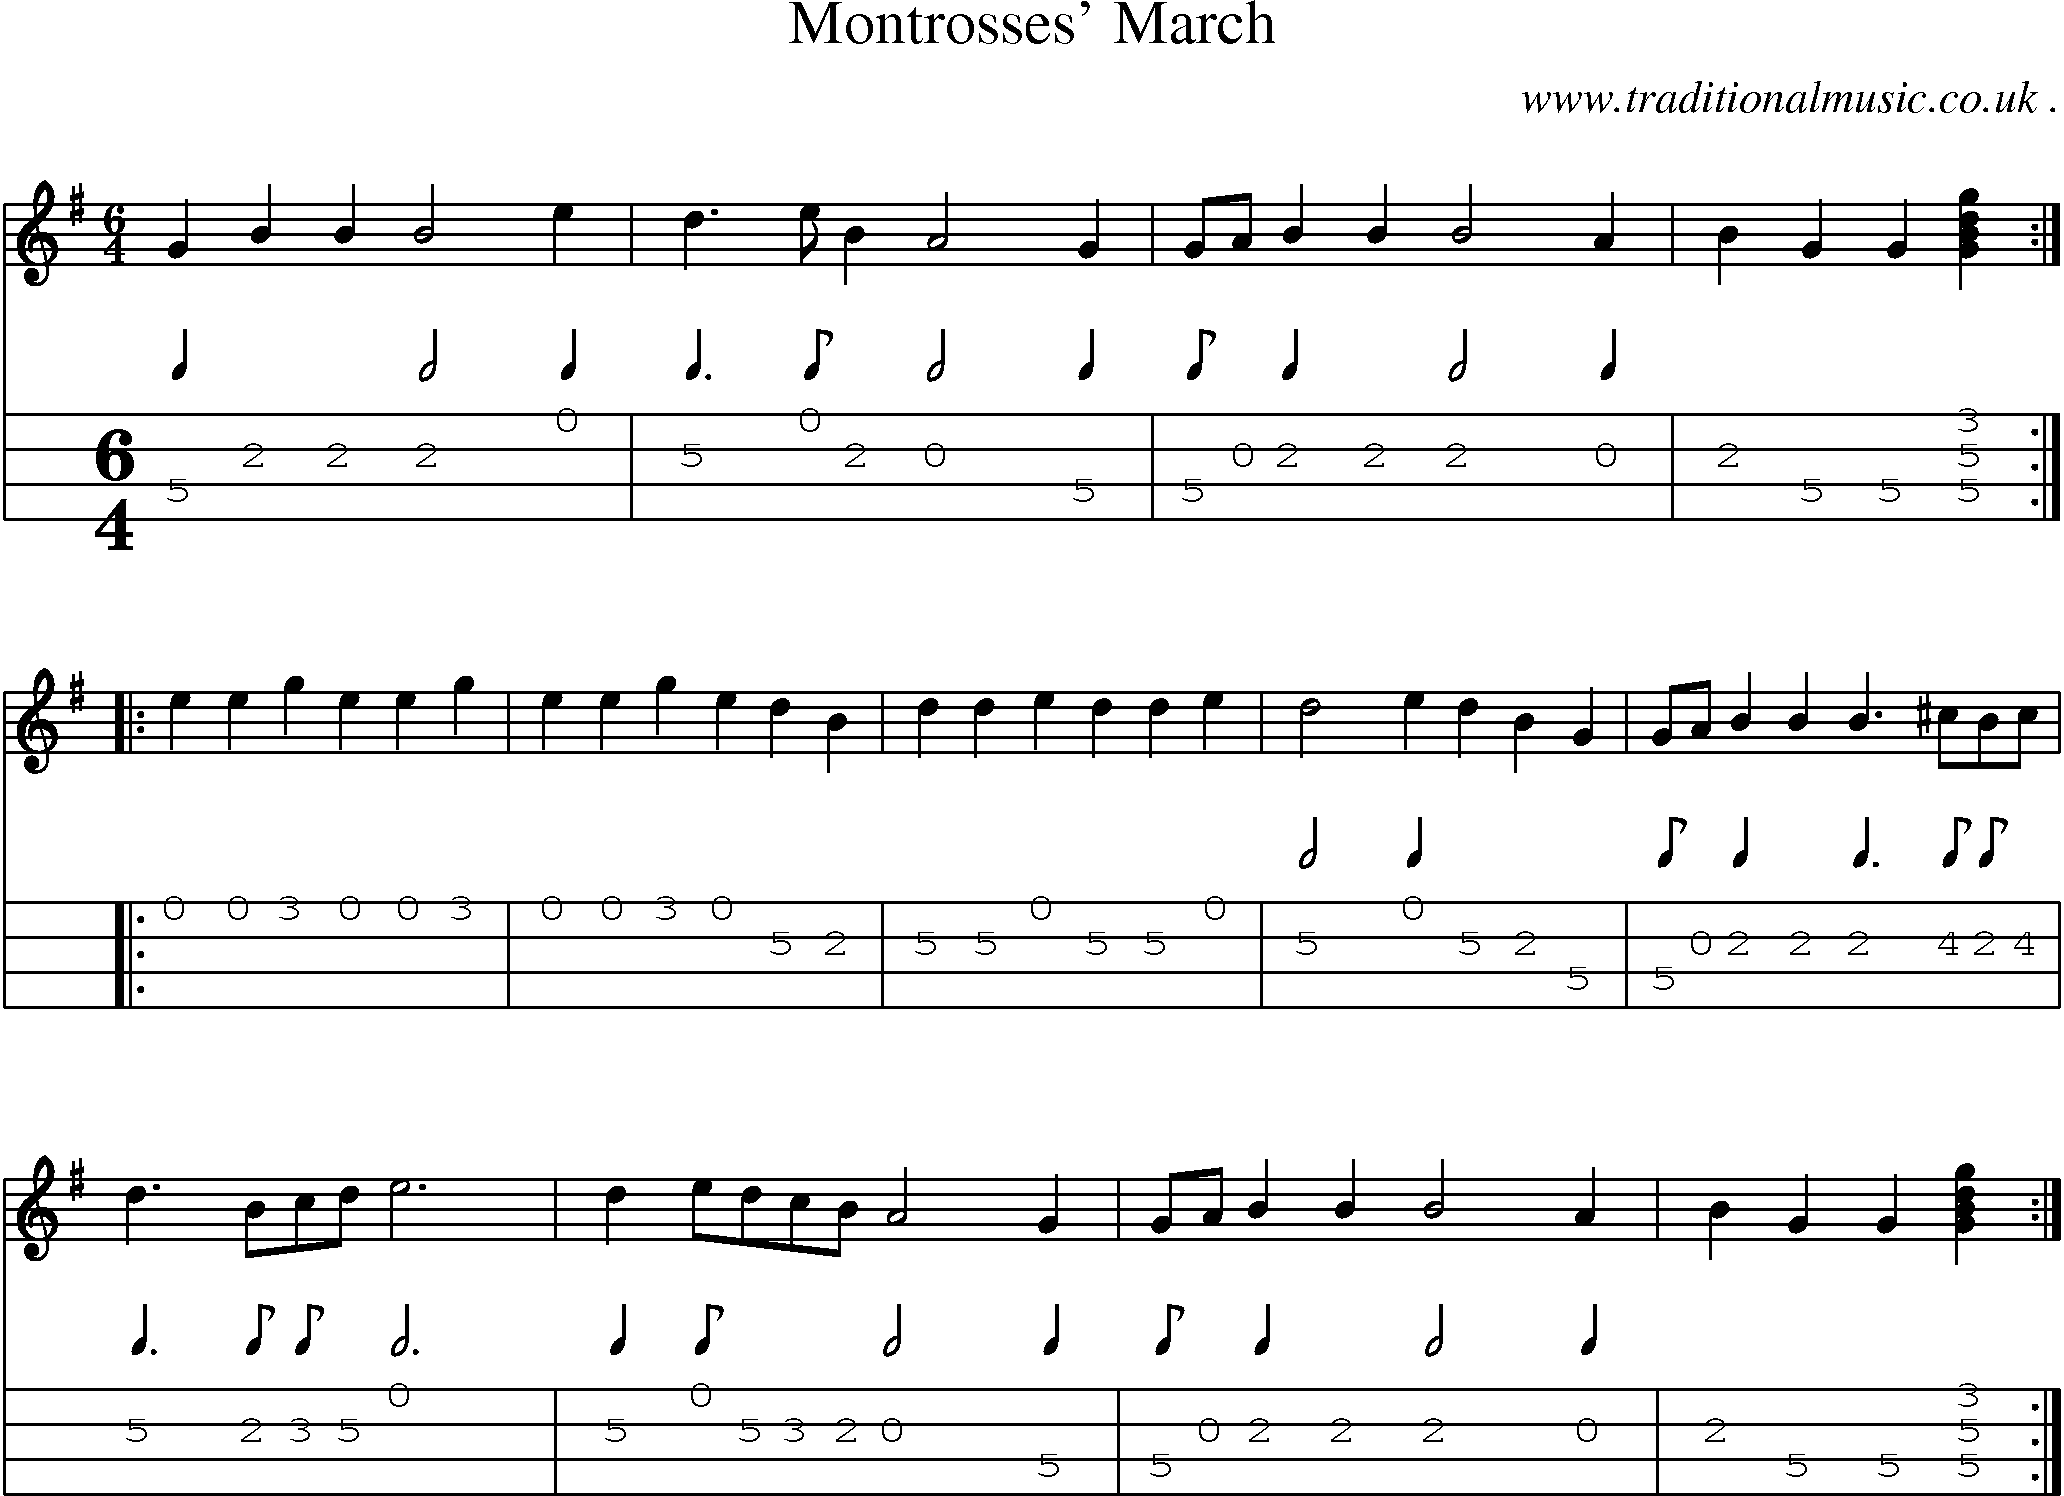 Sheet-music  score, Chords and Mandolin Tabs for Montrosses March